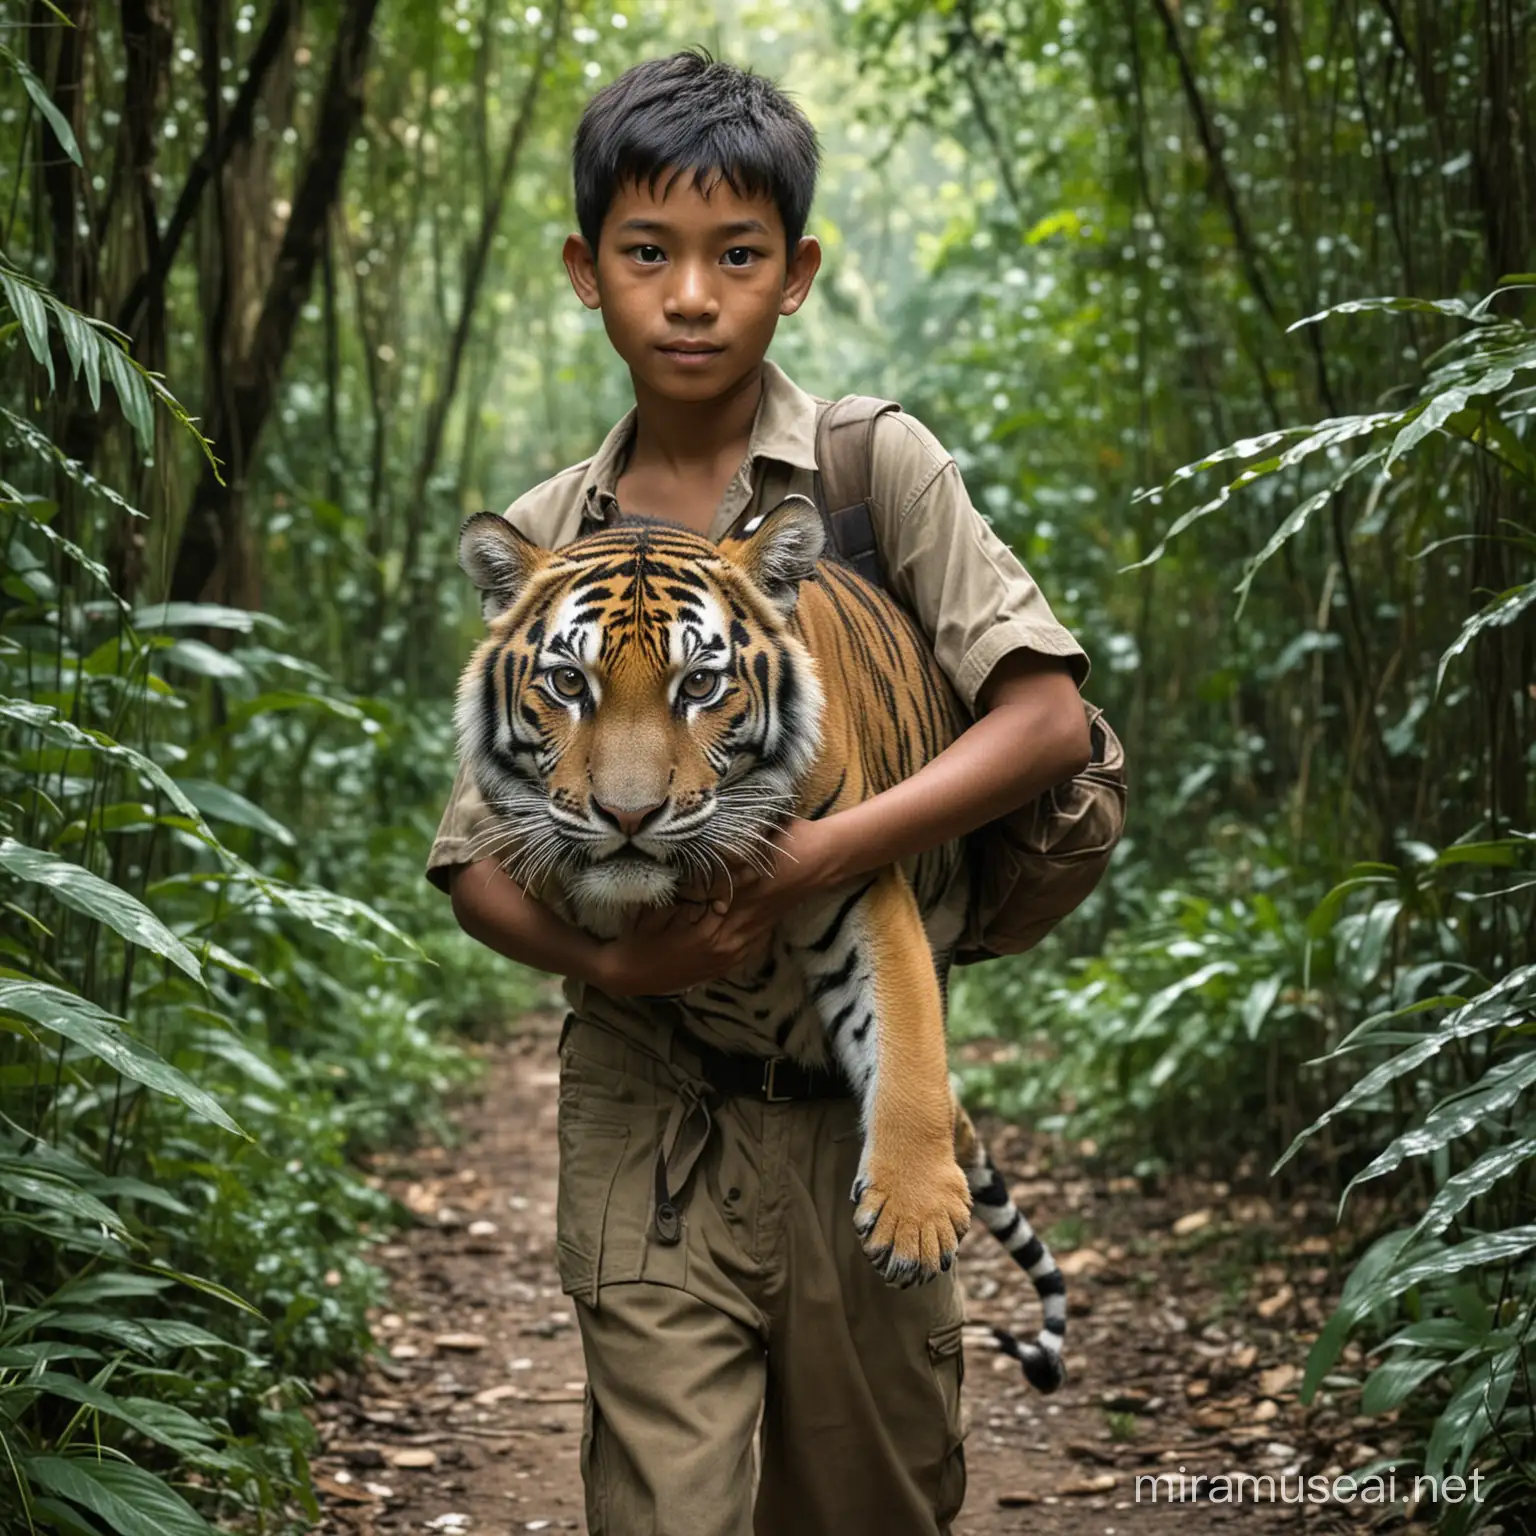 A 17-year-old boy from Indonesia is carrying a baby tiger while in the background is a deep jungle.